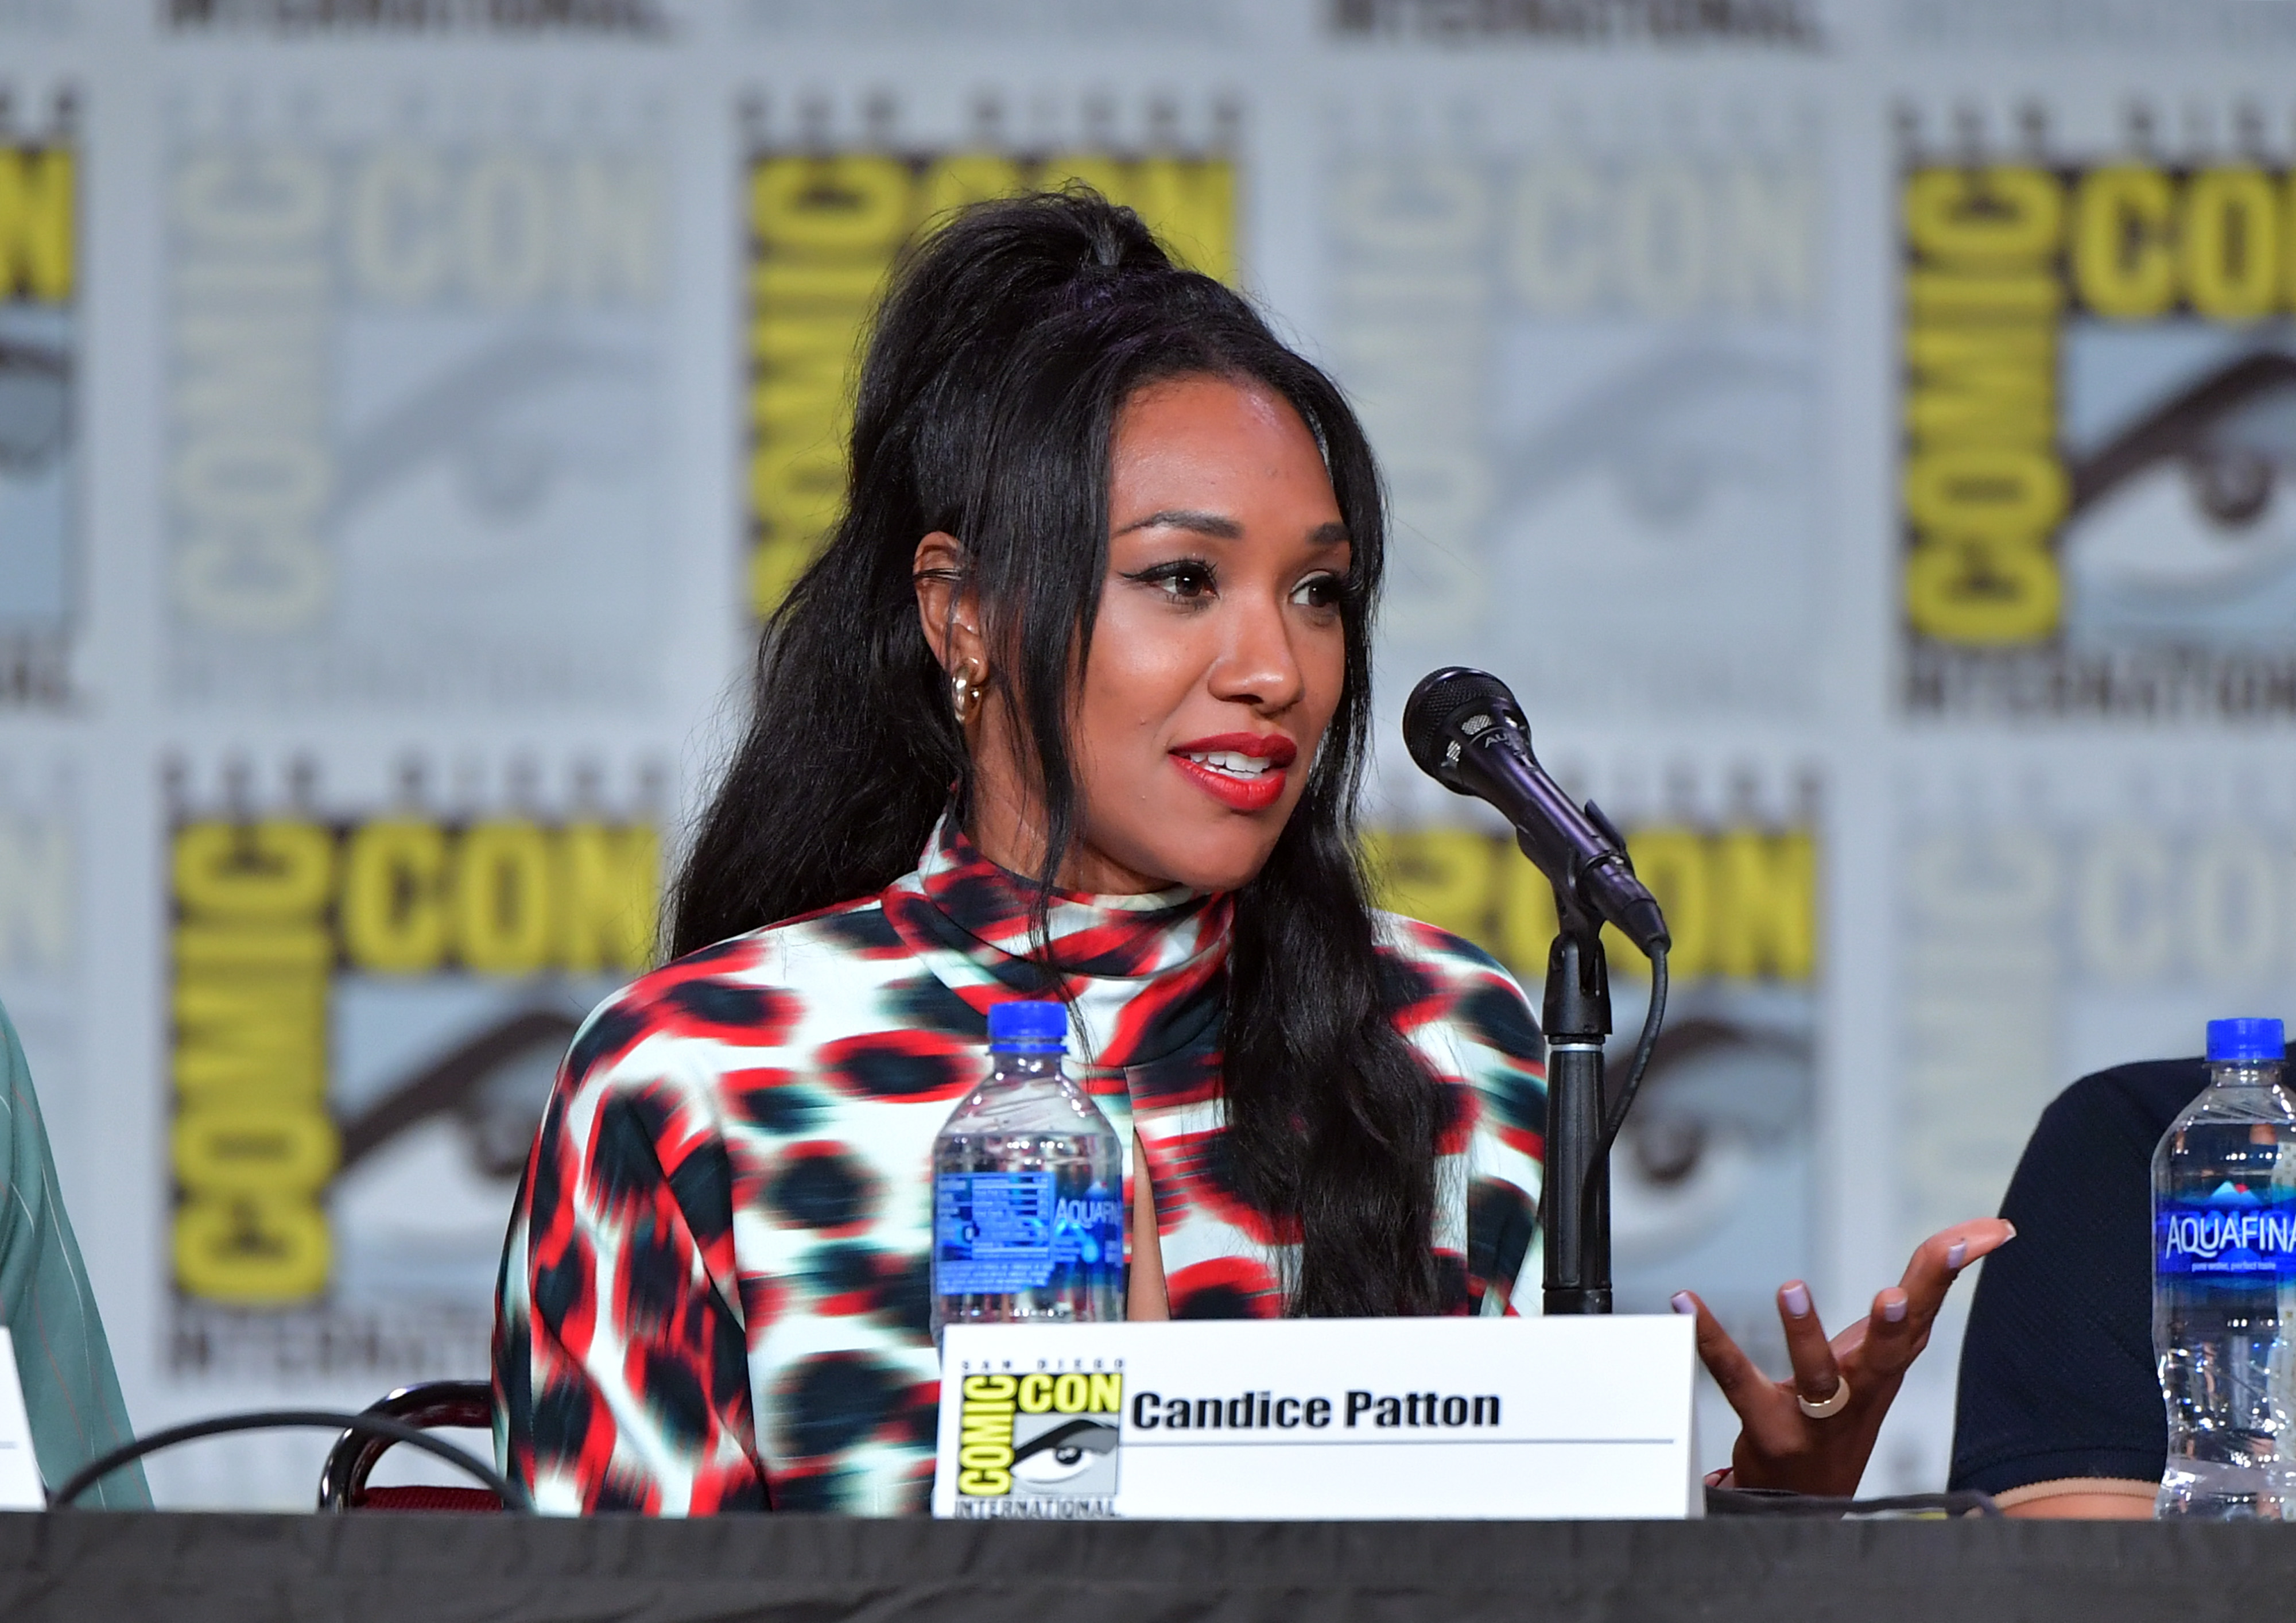 Candice Patton, who will be at DC FanDome 2021, wears a white long-sleeved, turtleneck dress with black and red smudged dots on it.